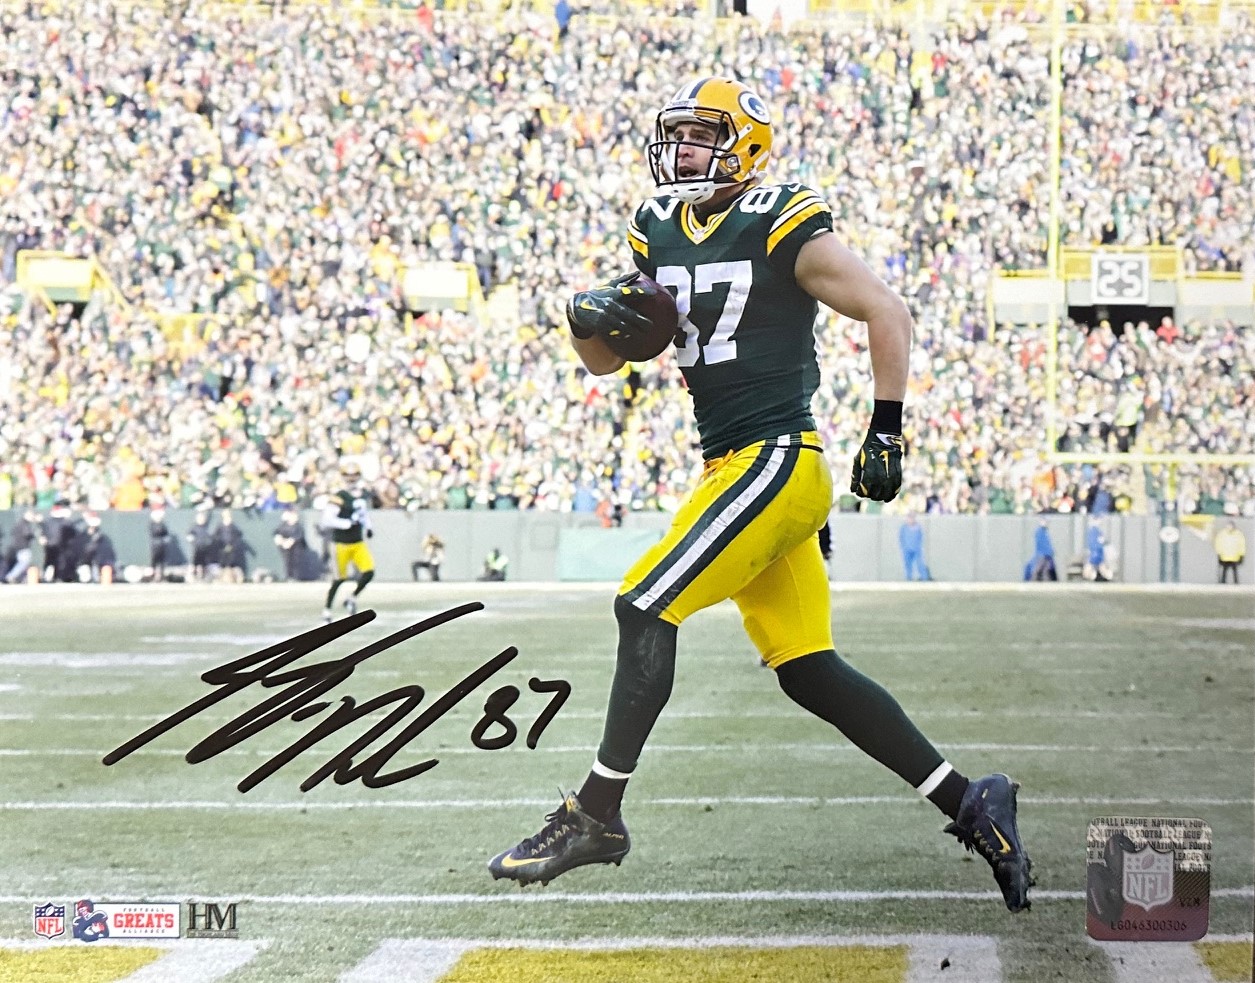 JORDY NELSON SIGNED 8X10 PACKERS PHOTO #21